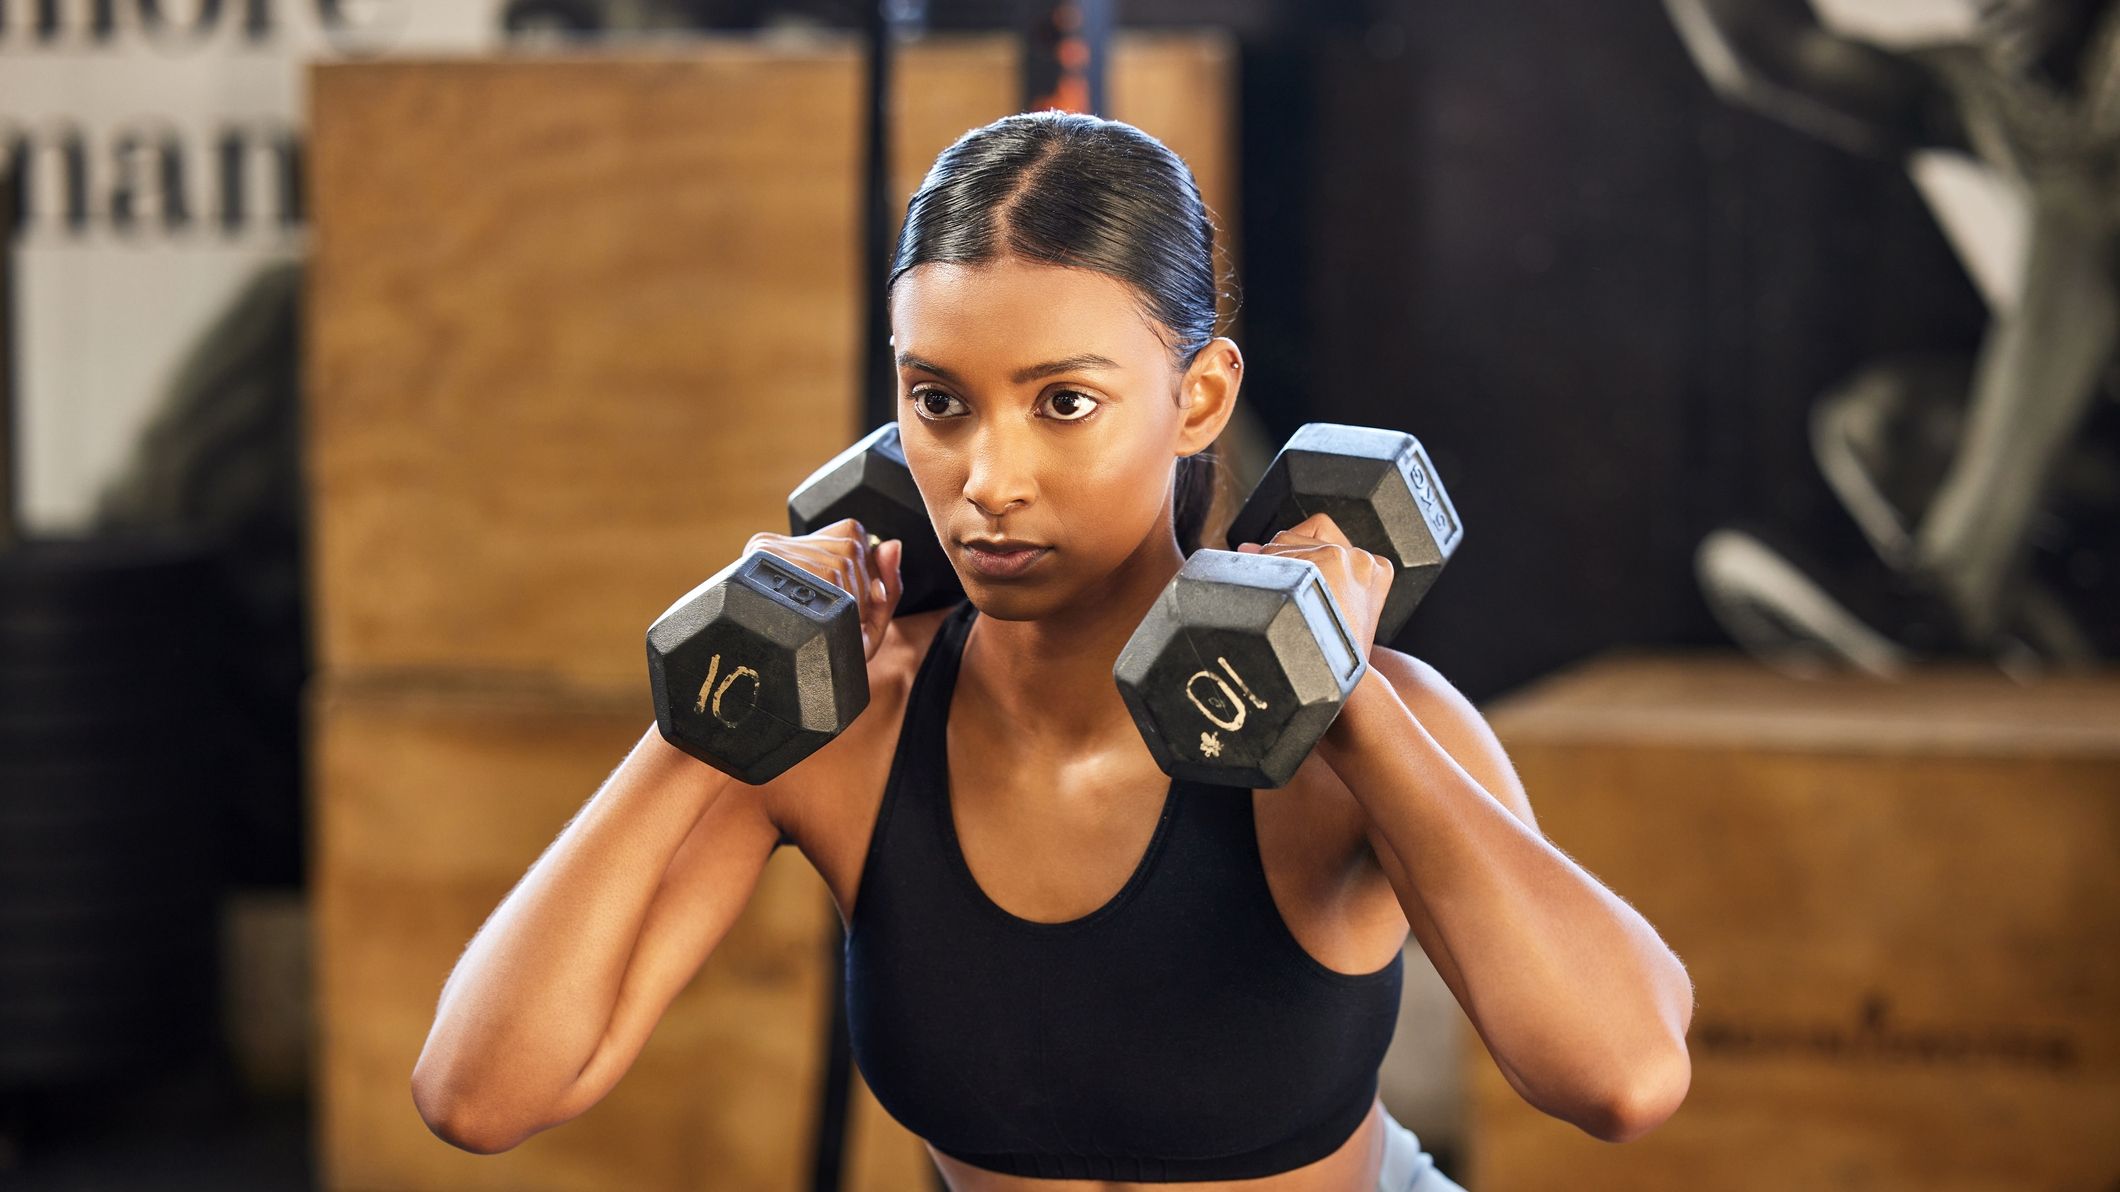 How Long Should You Lift Weights for an Effective Workout?